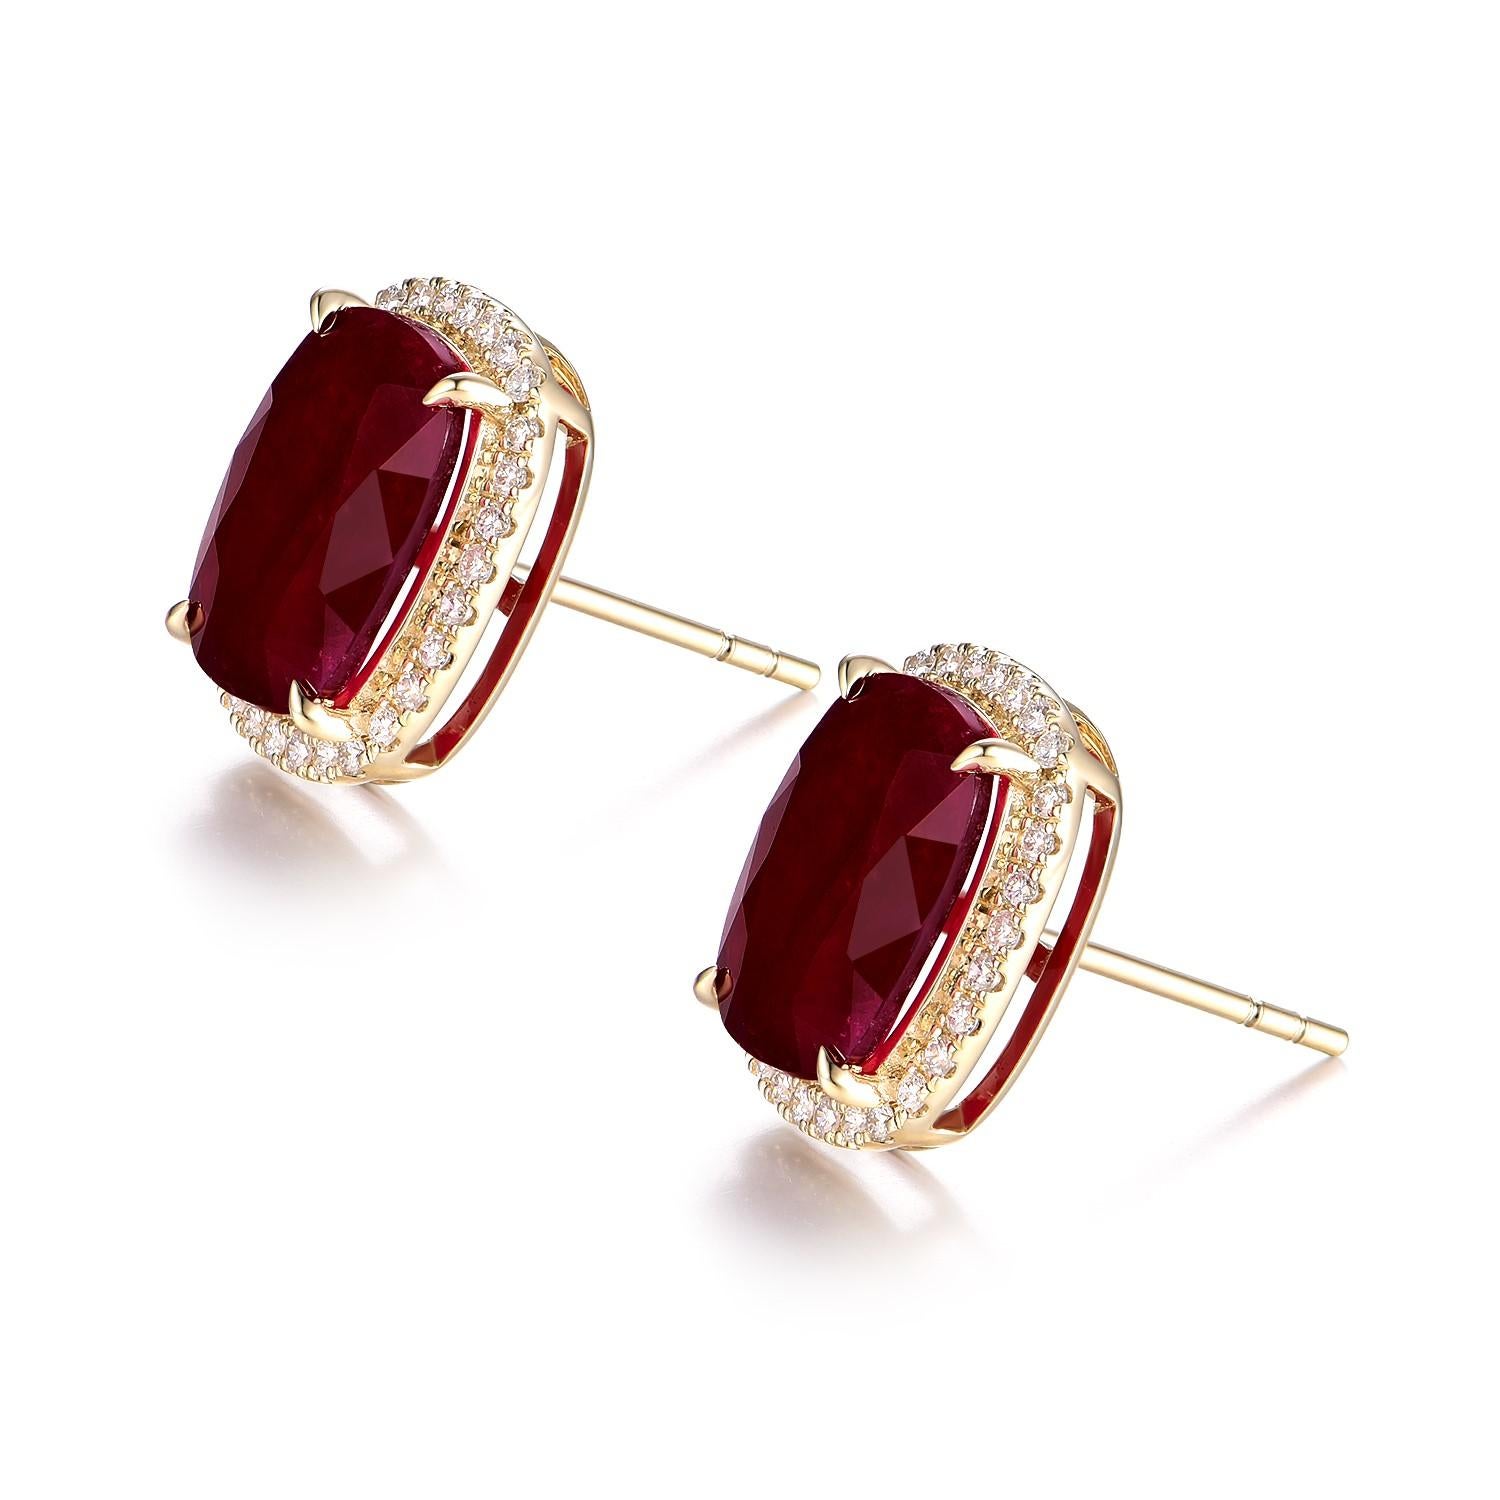 These radiant earrings are a testament to timeless design and luxury. Crafted in 14K yellow gold, each earring showcases a stunning ruby, with a combined weight of 8.29 carats, radiating with a deep red hue that is both bold and enchanting. The